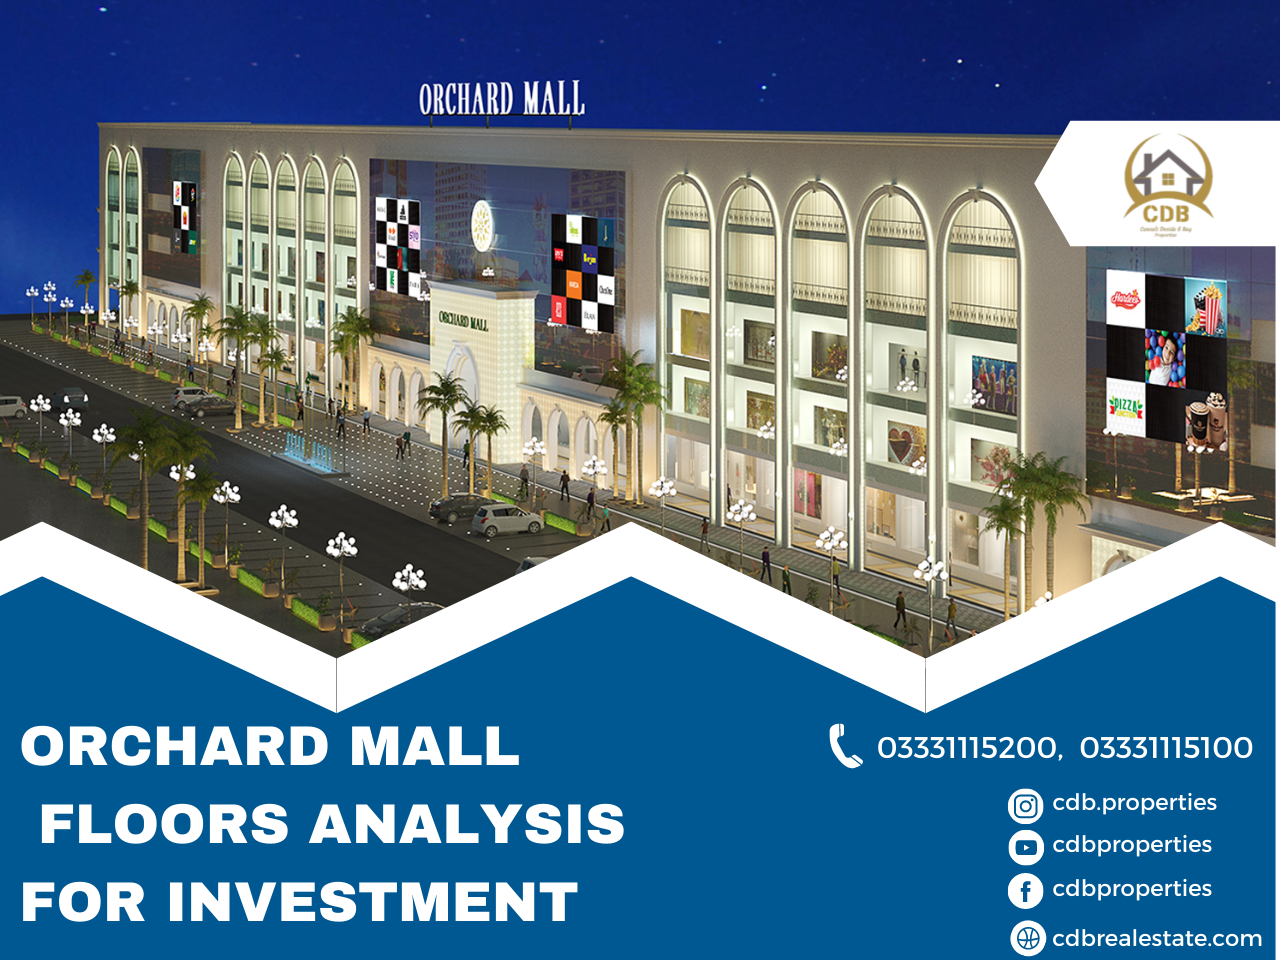 Orchard Mall Floors Analysis for Investment